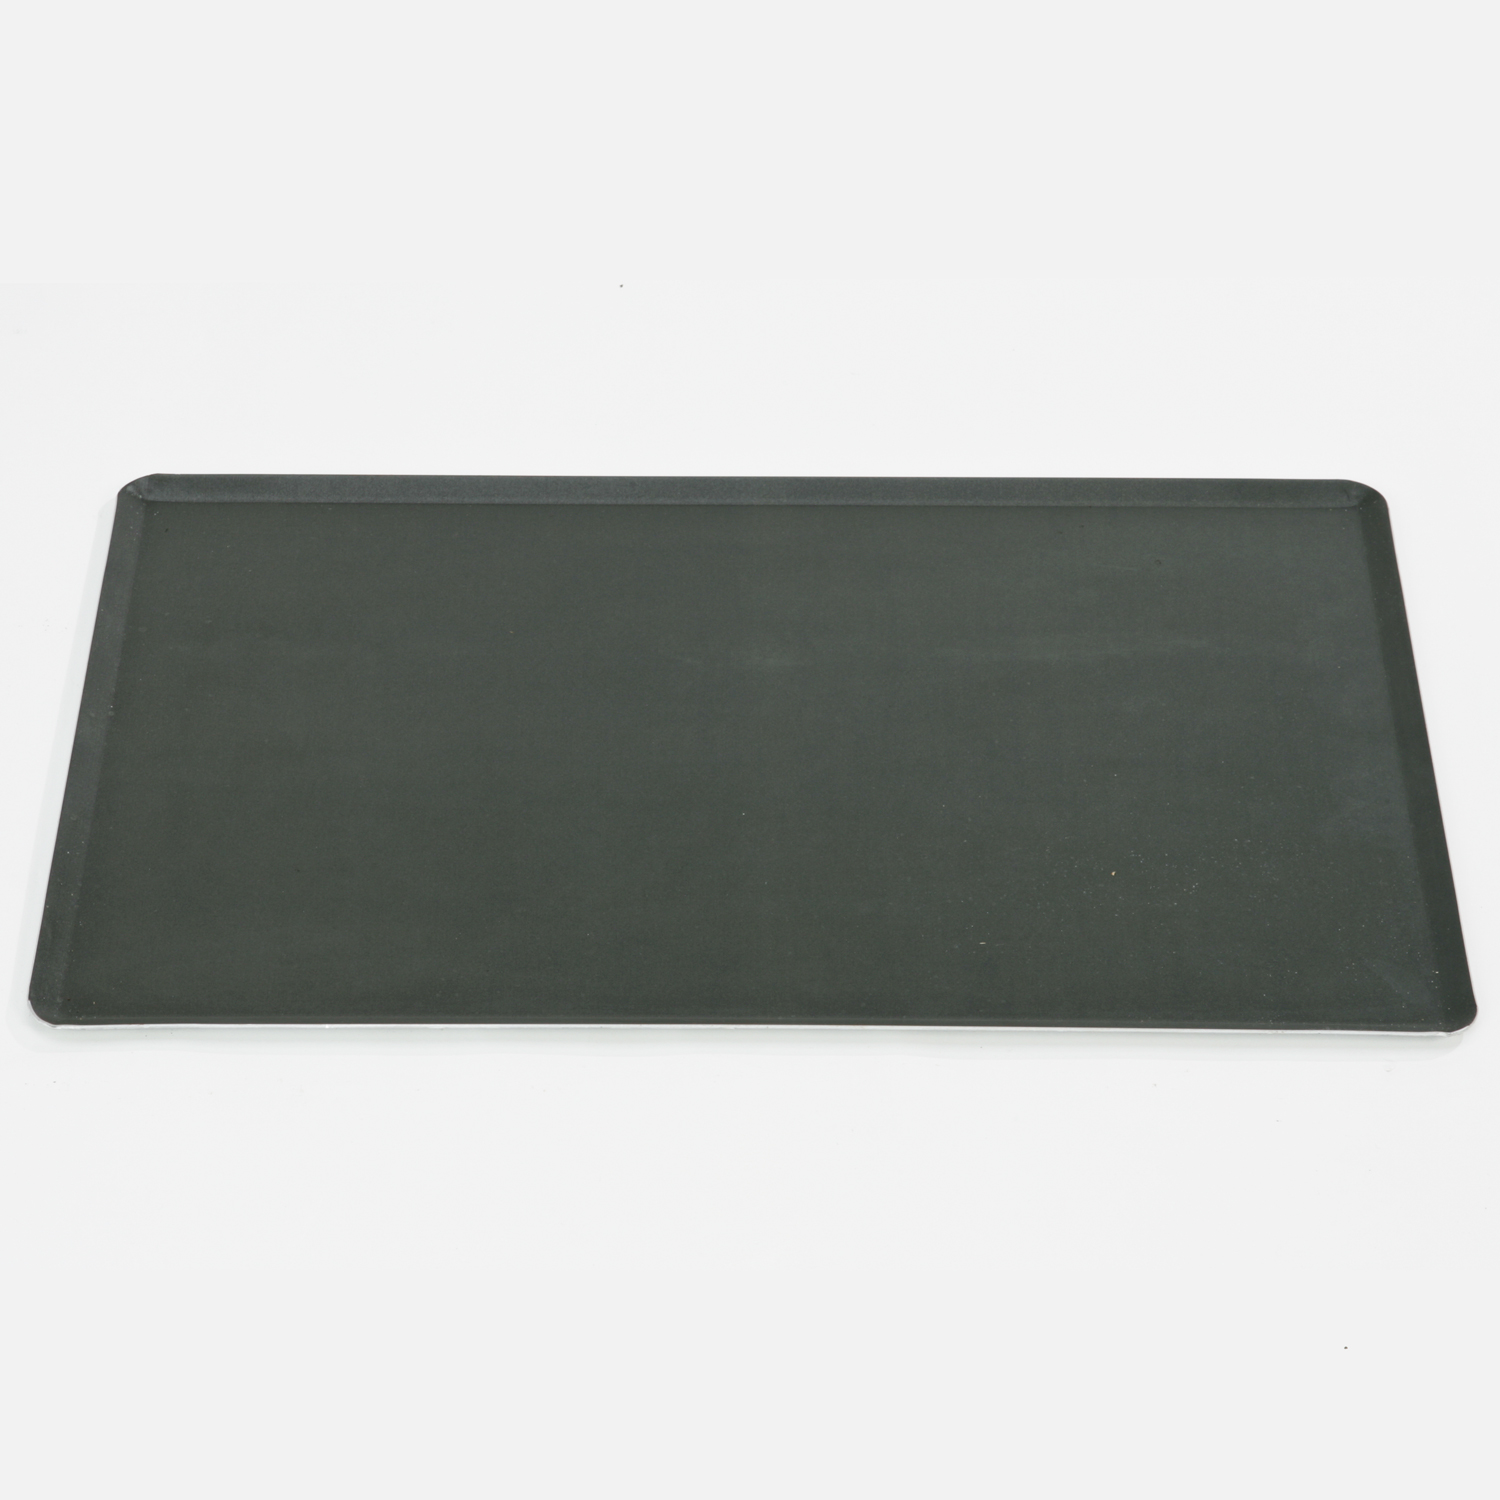 Trilax Coated Roasting and Baking Tray 2/3GN for XS Series Rational 